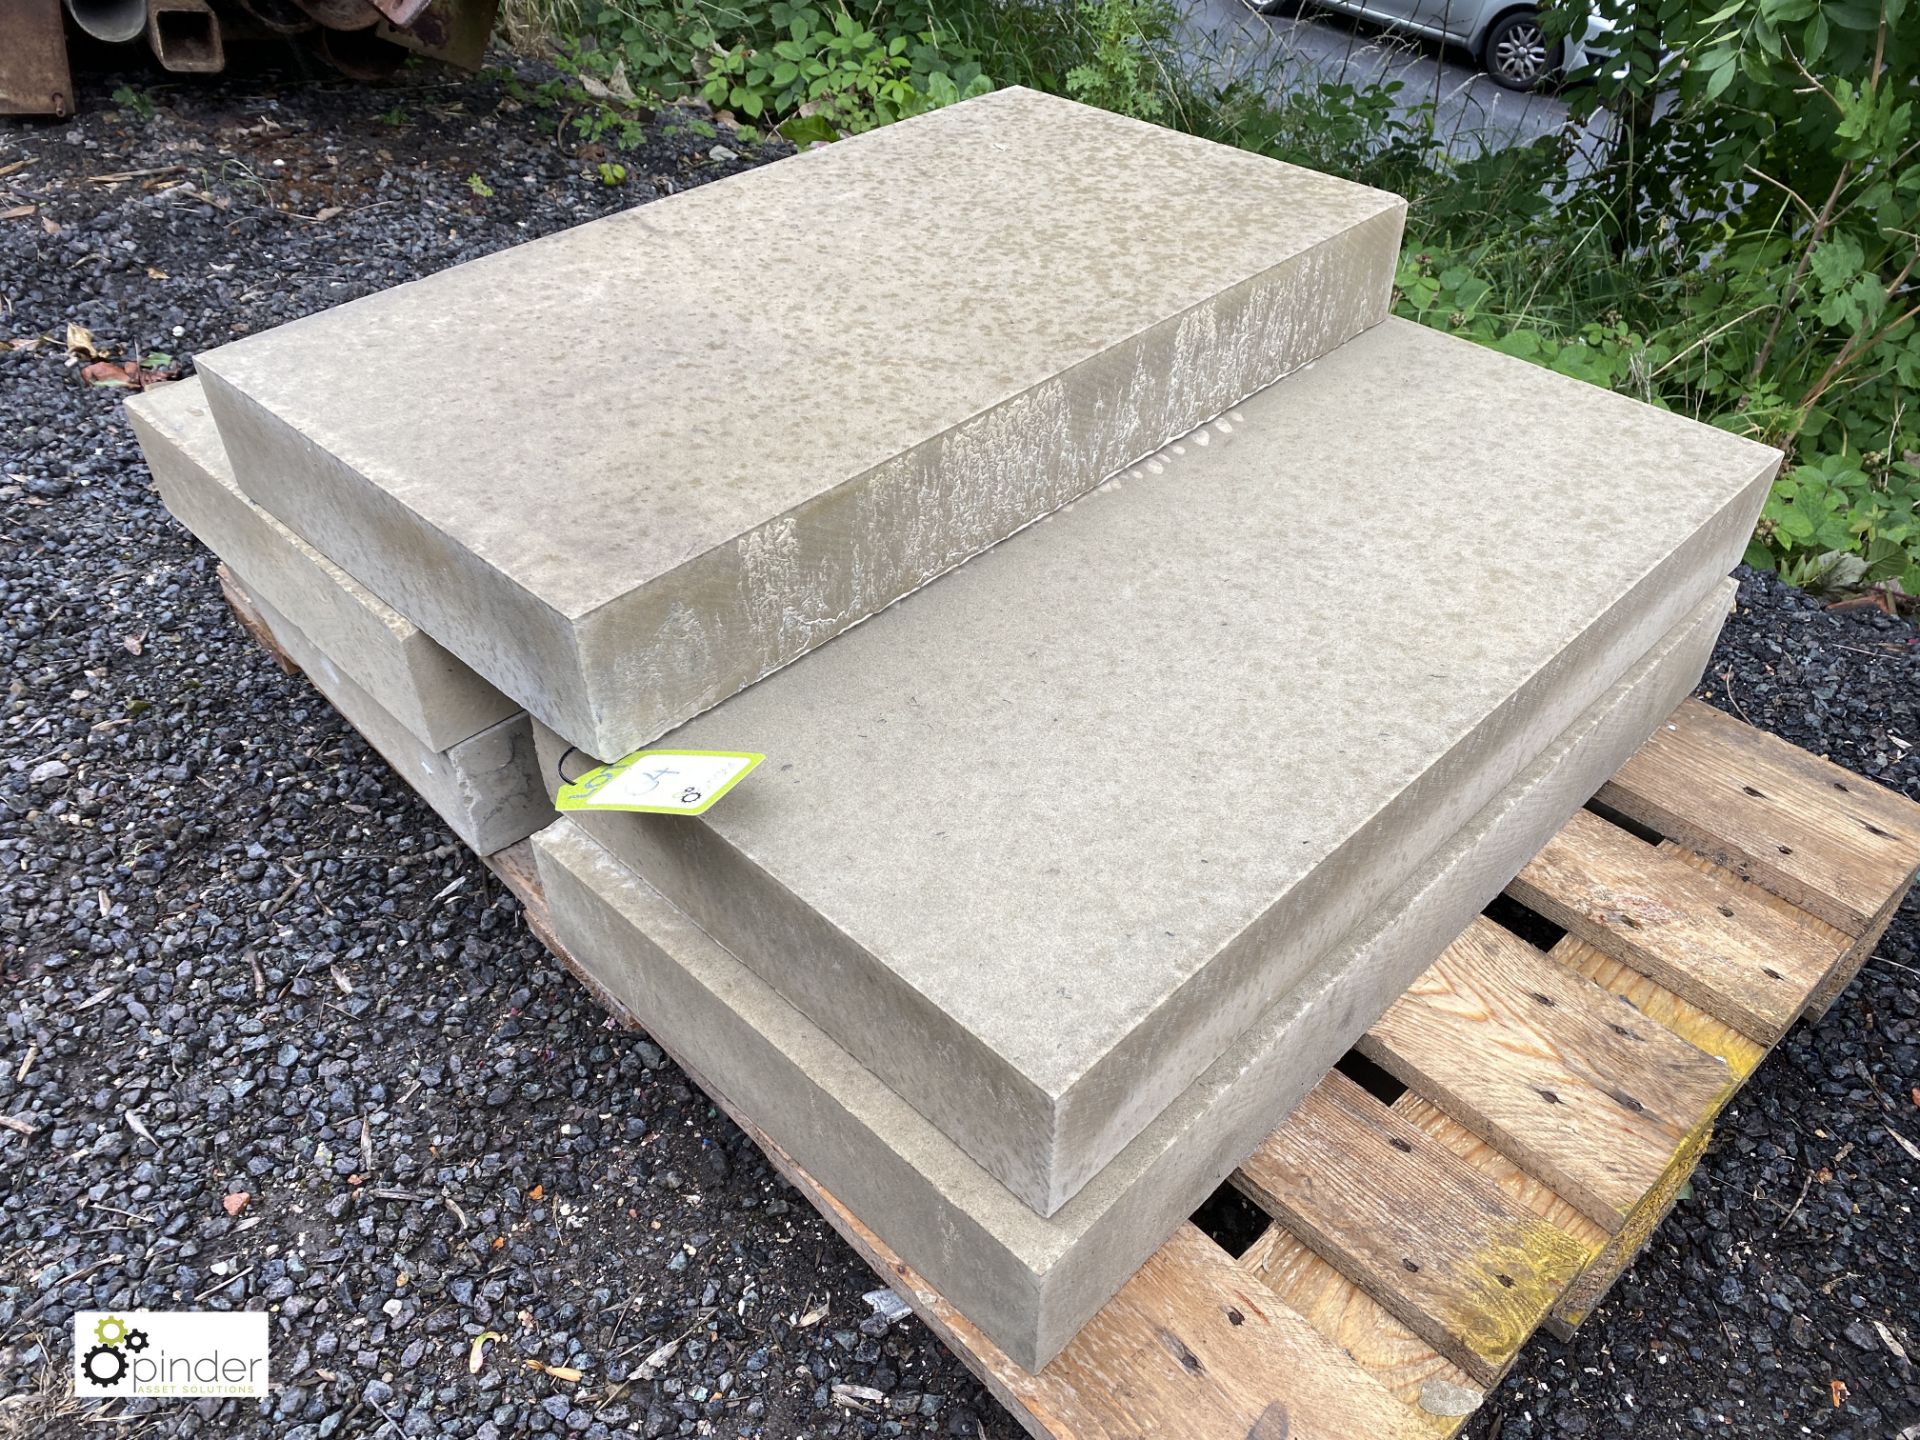 5 Yorkshire stone Quoin Slabs, approx. 800mm x 430mm x 105mm, to pallet (LOCATION: Woodhead Road) - Image 3 of 3